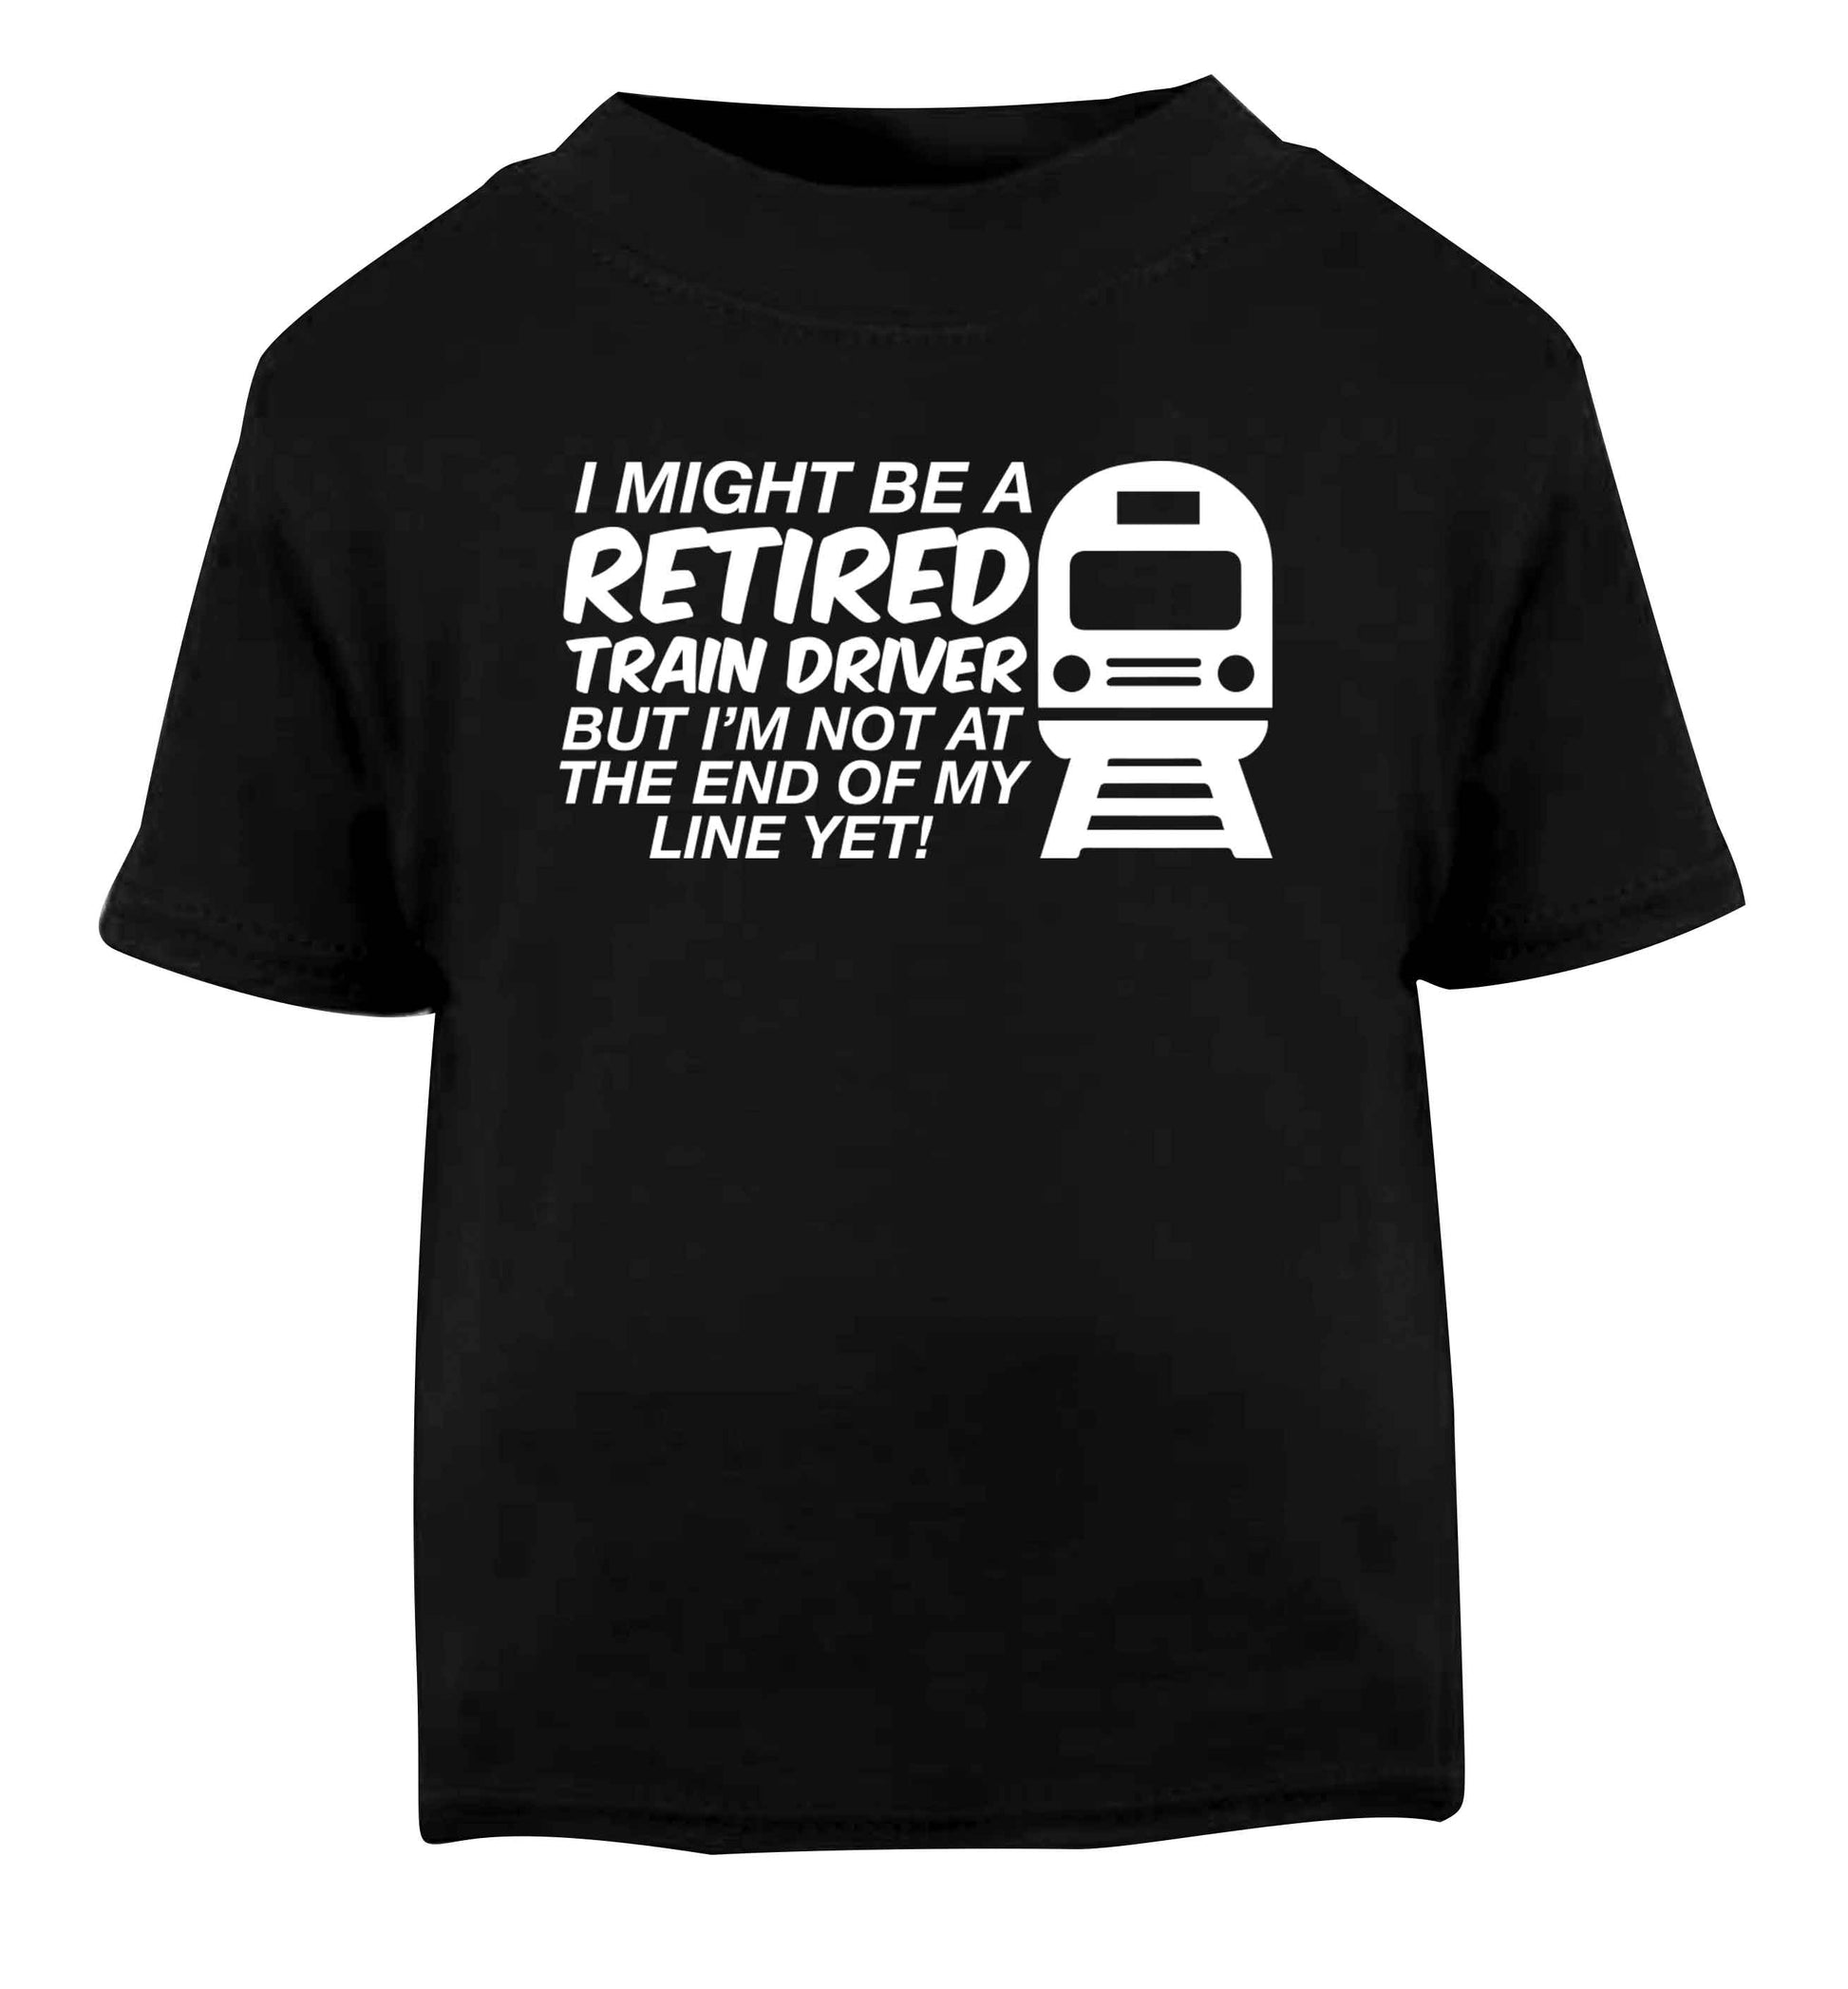 Retired train driver but I'm not at the end of my line yet Black Baby Toddler Tshirt 2 years